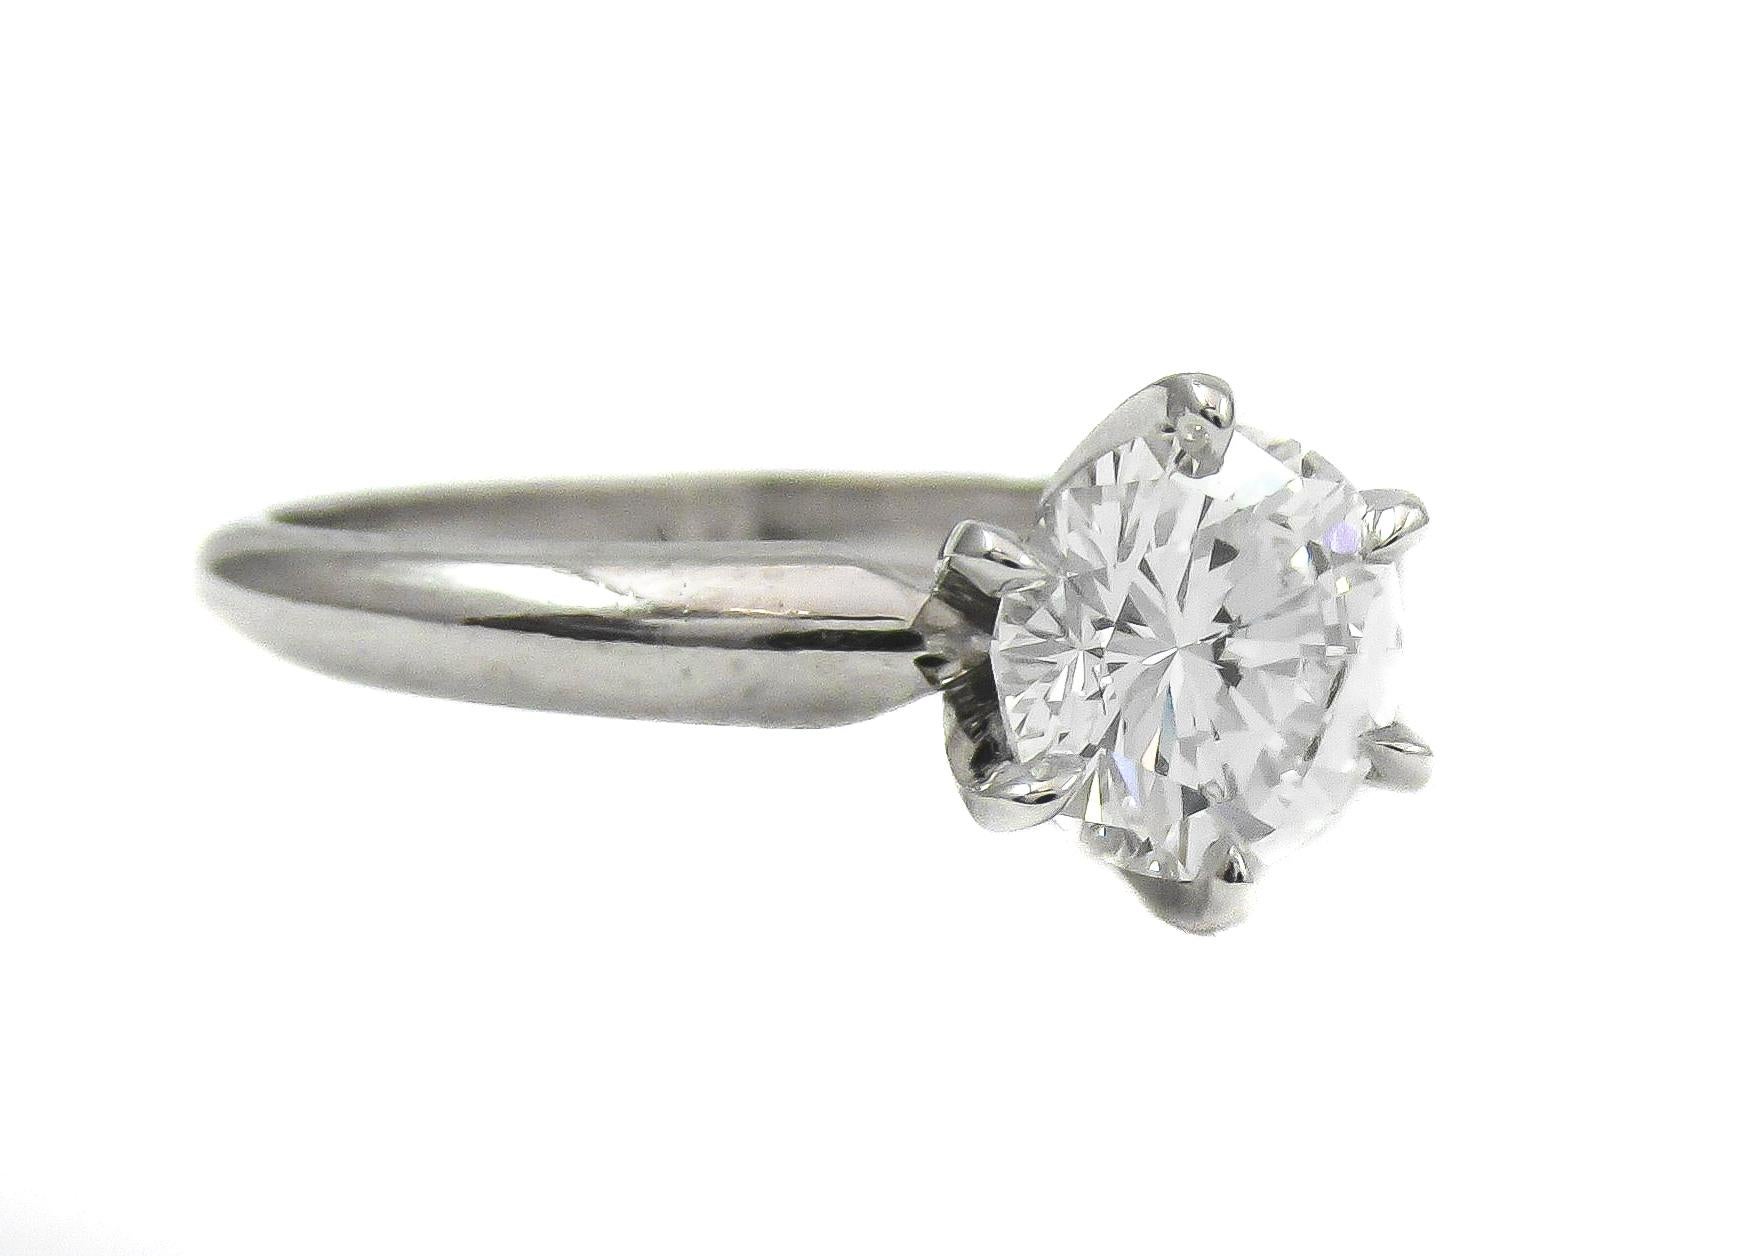 The very best is displayed in this wonderful sparkling, bright and white diamond engagement ring. Not requiring any further embellishment, this GIA certified round brilliant cut diamond is simply set in a platinum mounting being securely held by 6